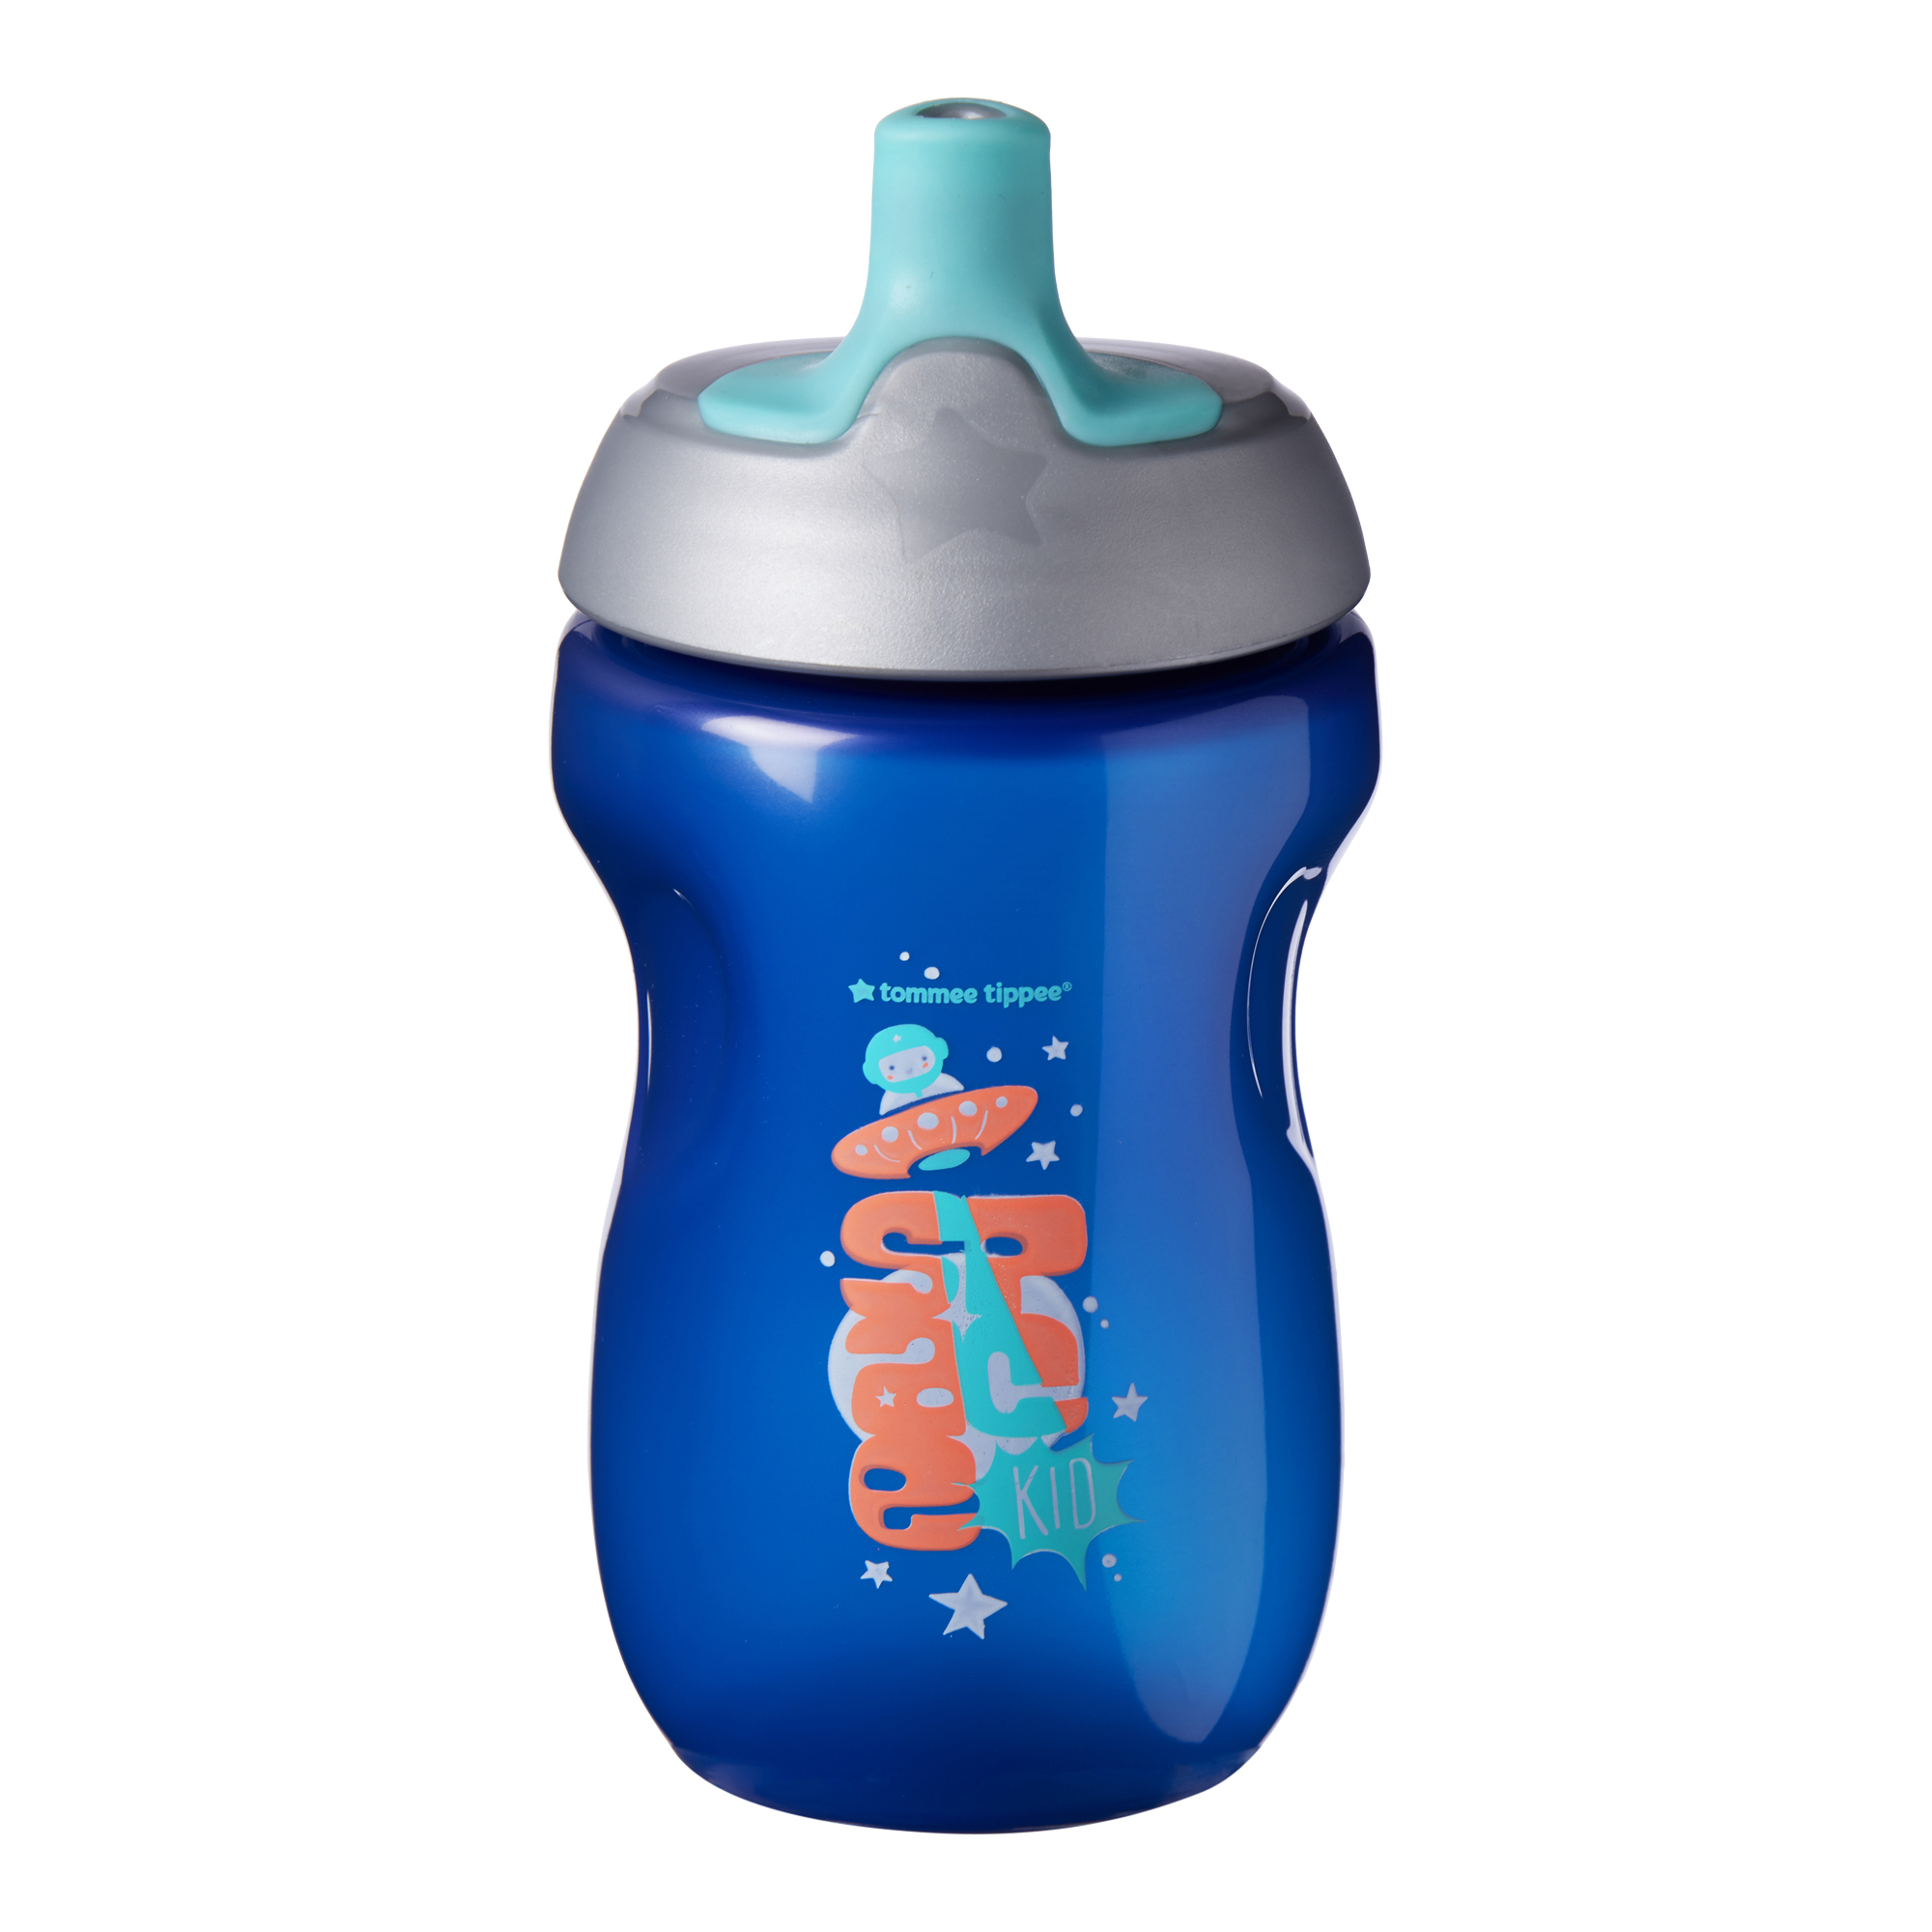 Cana Sports, ONL Tommee Tippee, 300 ml x 1 buc, 12 luni+, Albastra image 2